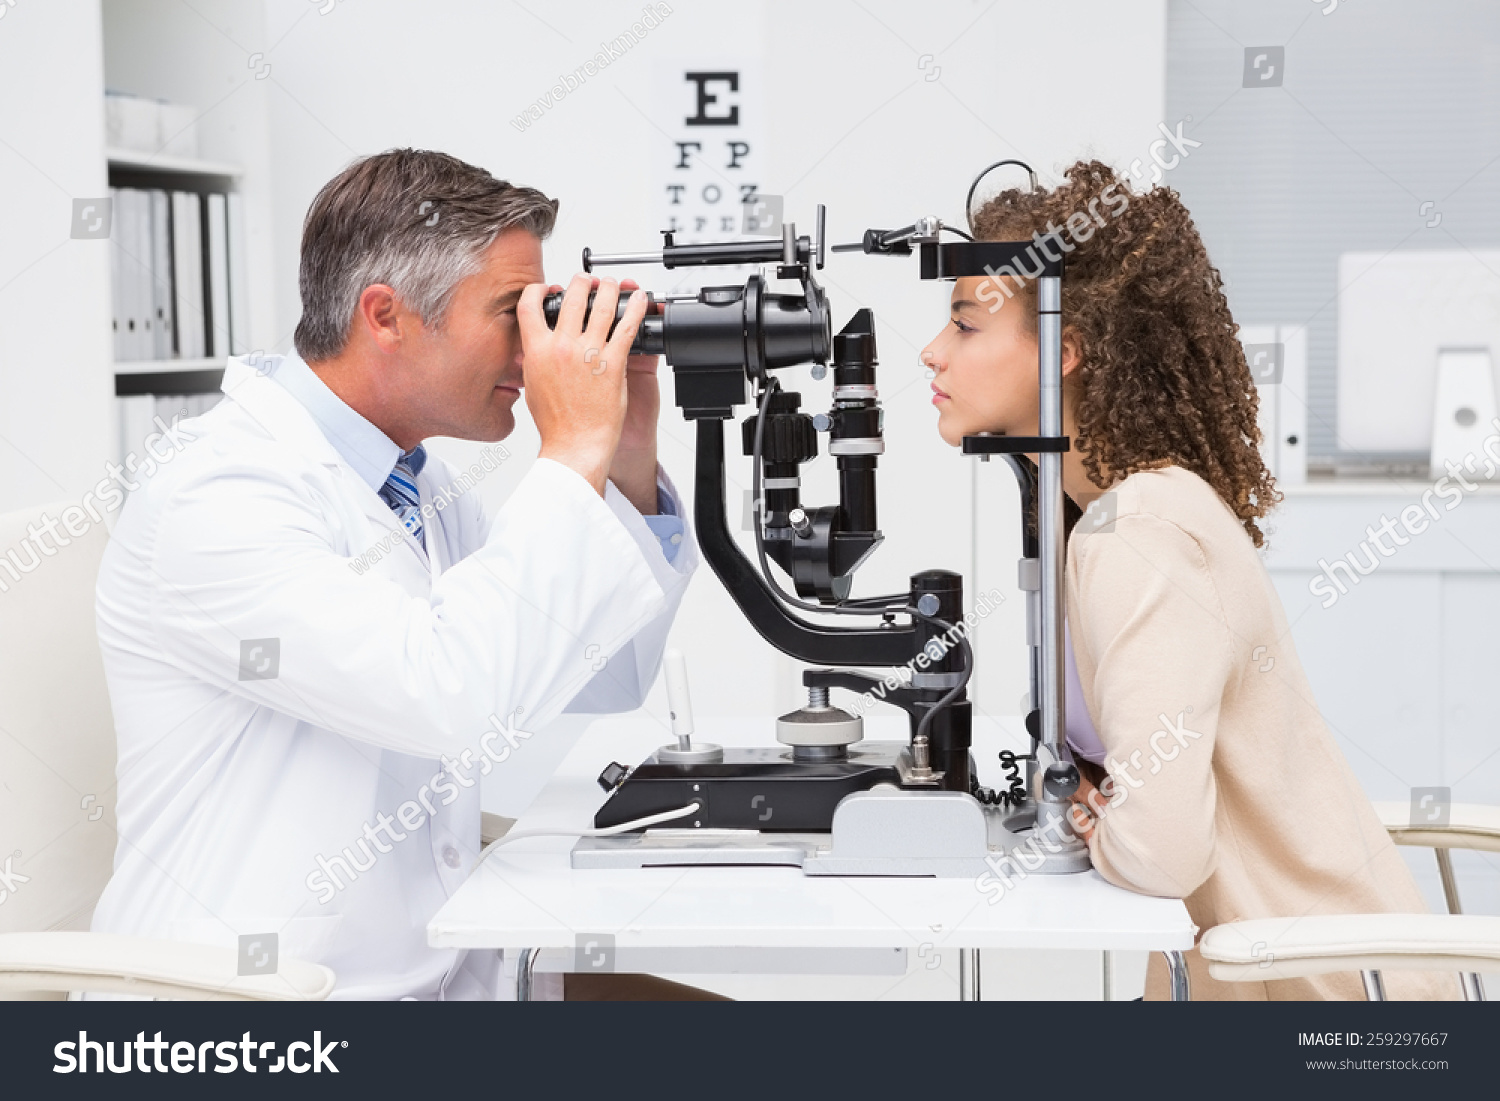 Woman doing eye test with optometrist in medical office #259297667